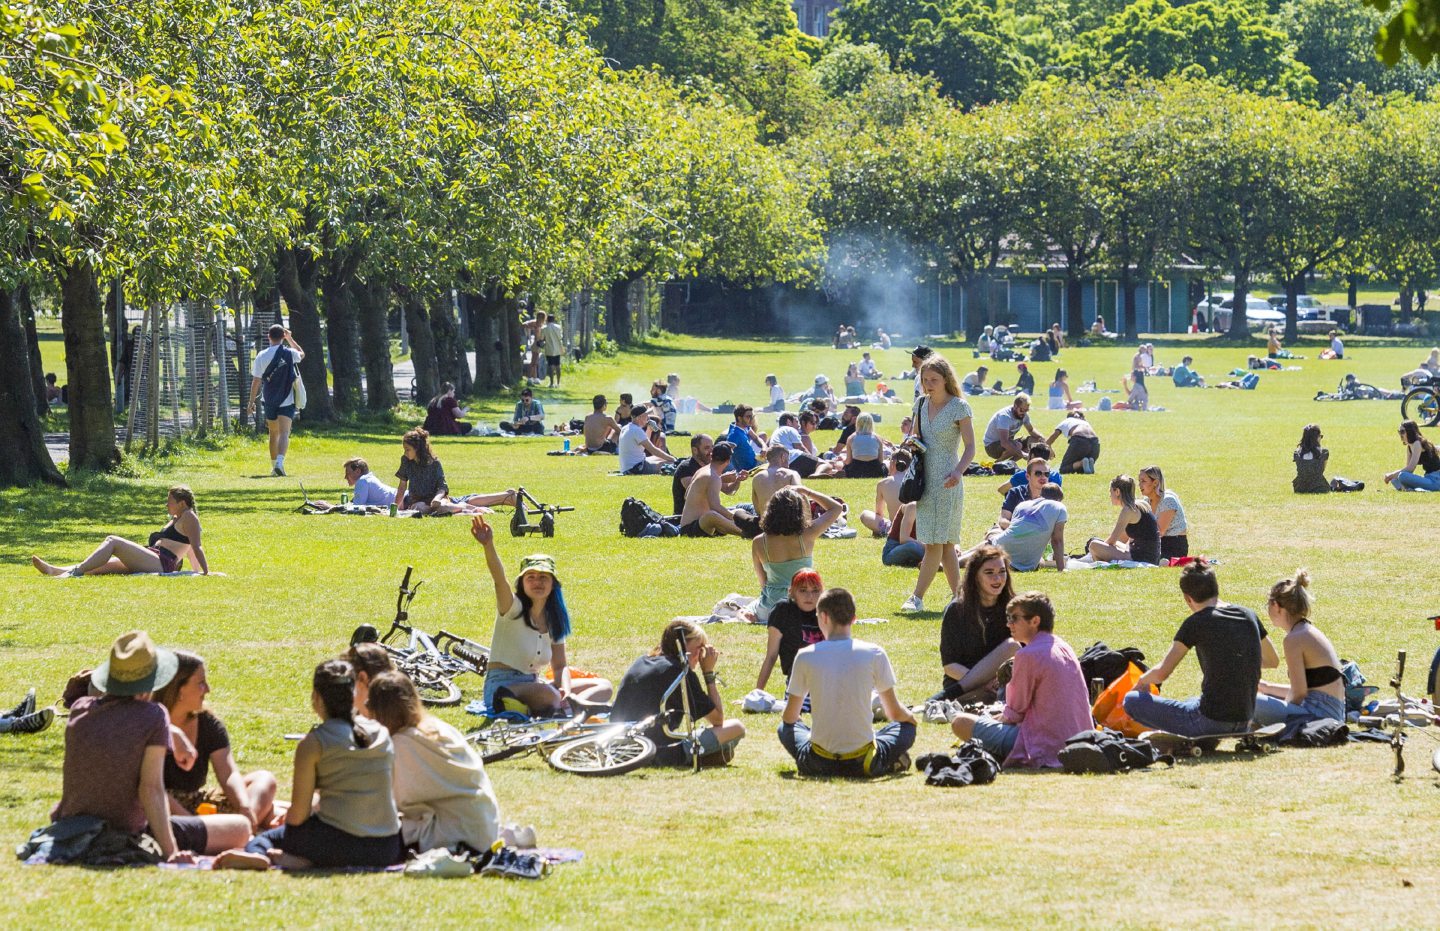 People gathered in the Meadows in Edinburgh after lockdown restrictions were eased.